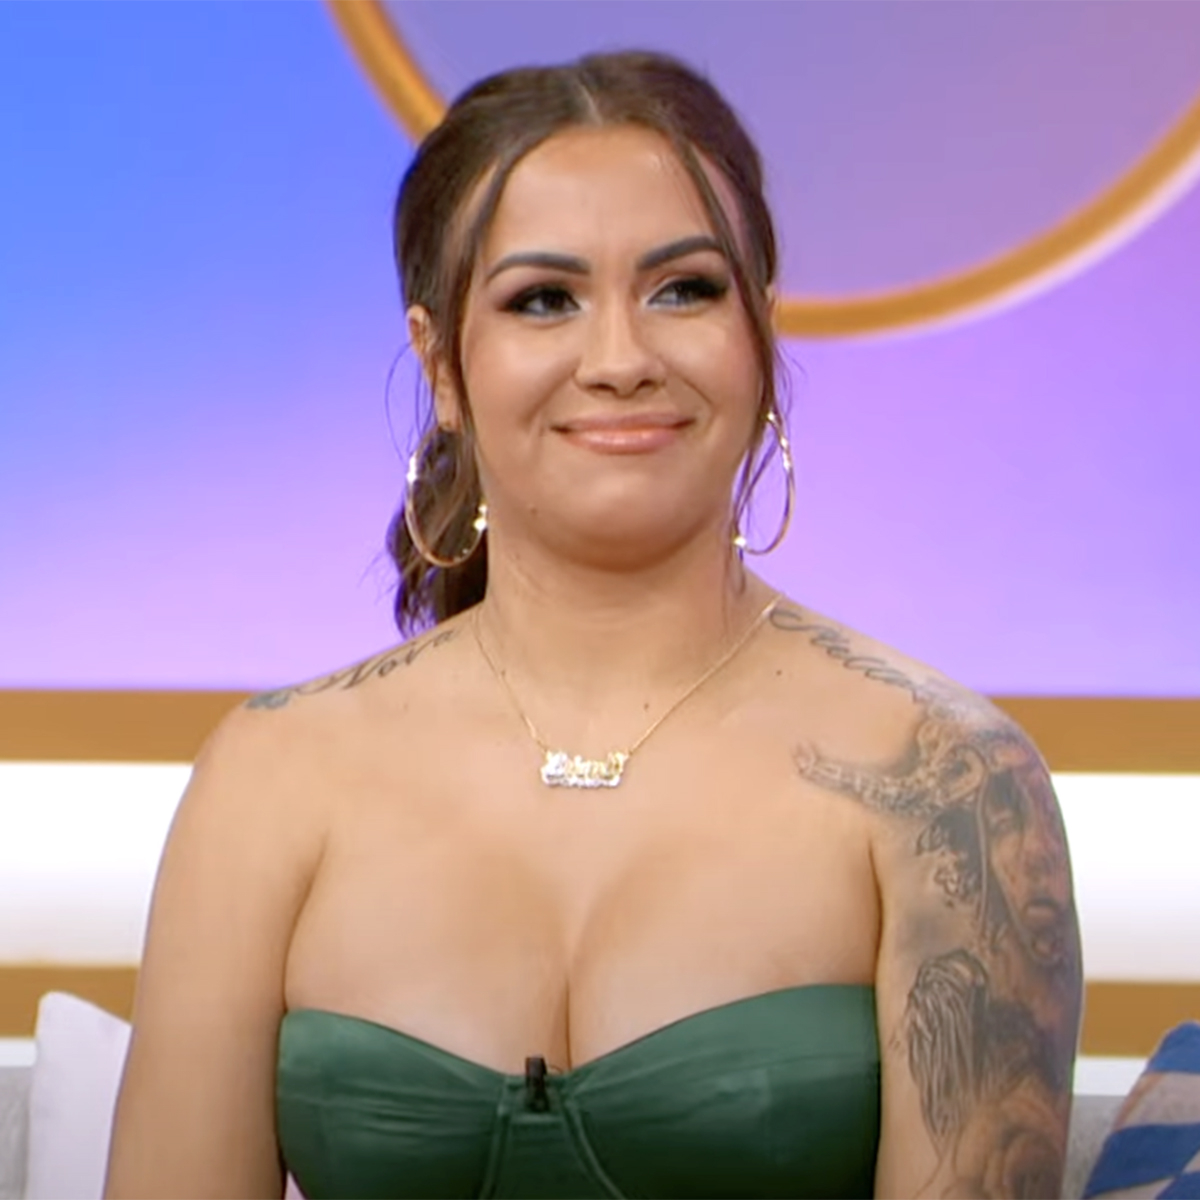 Teen Mom's Briana DeJesus Says Past Relationships Taught Her to Look for Red Flags